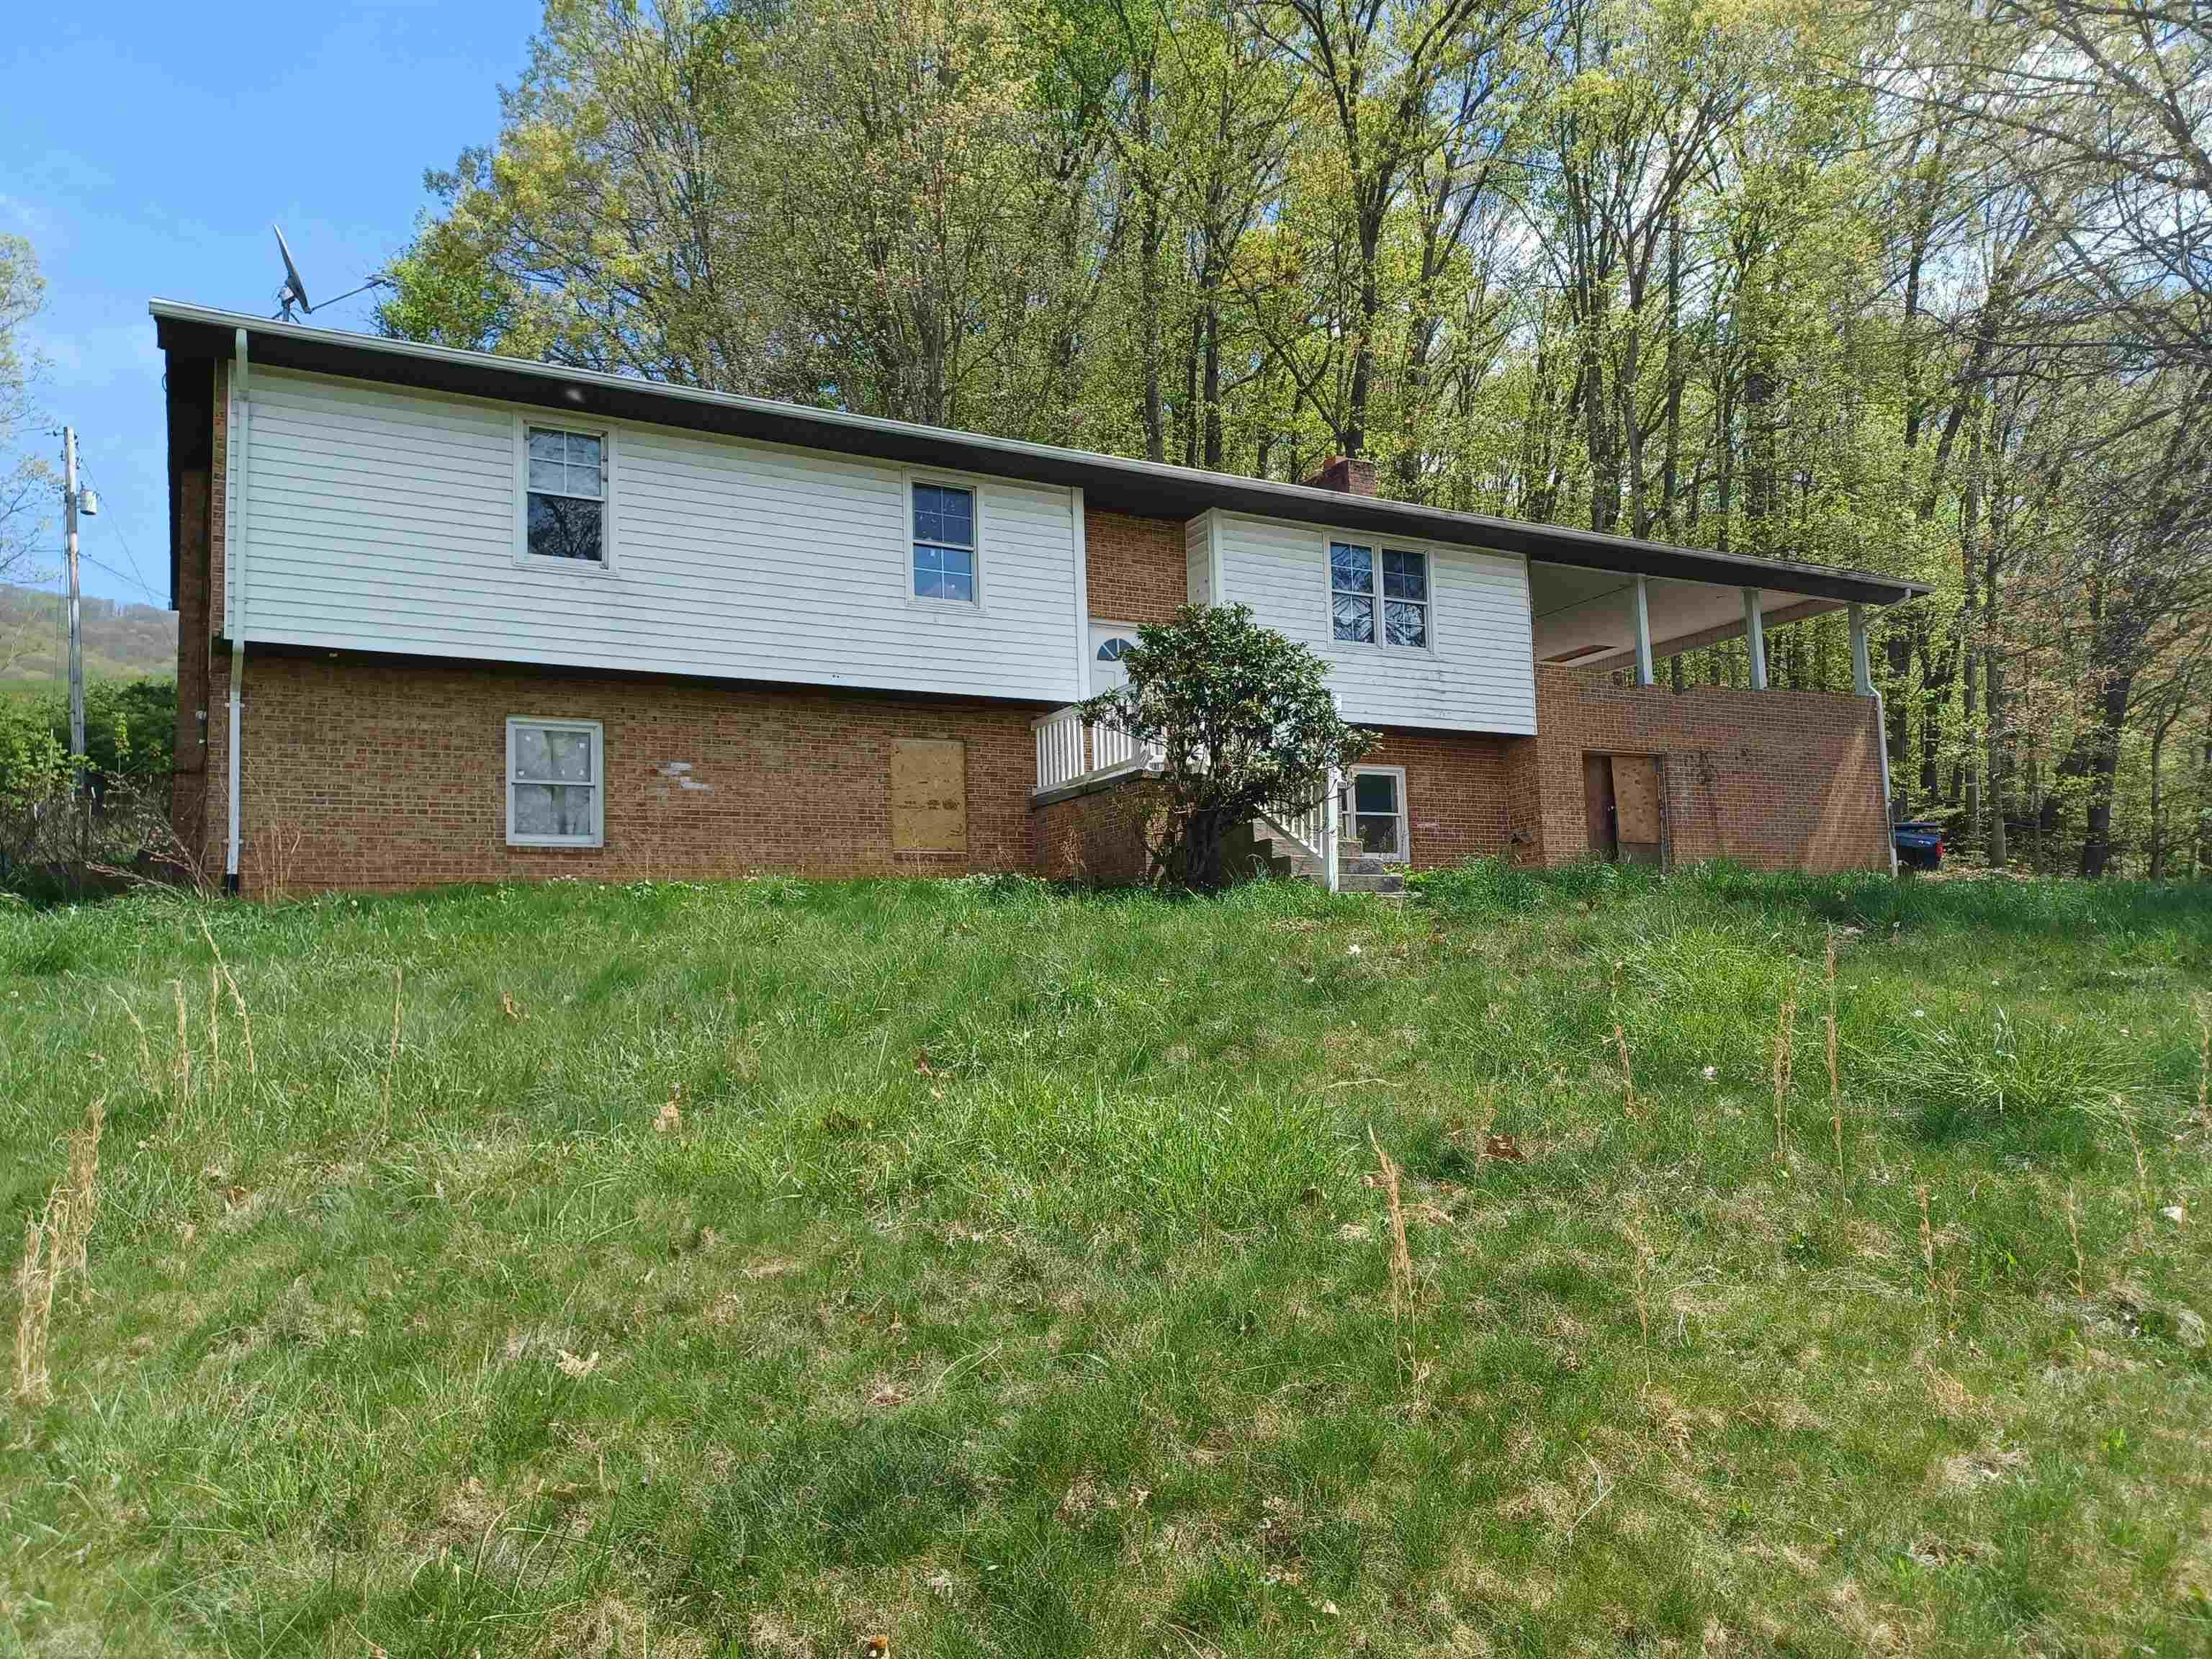 Enjoy this brick ranch style home located on almost 3 acres. This home has mountain views and lots of privacy. This home has 4 bedrooms, 2 full bathes, large kitchen, family room and hardwood floors.